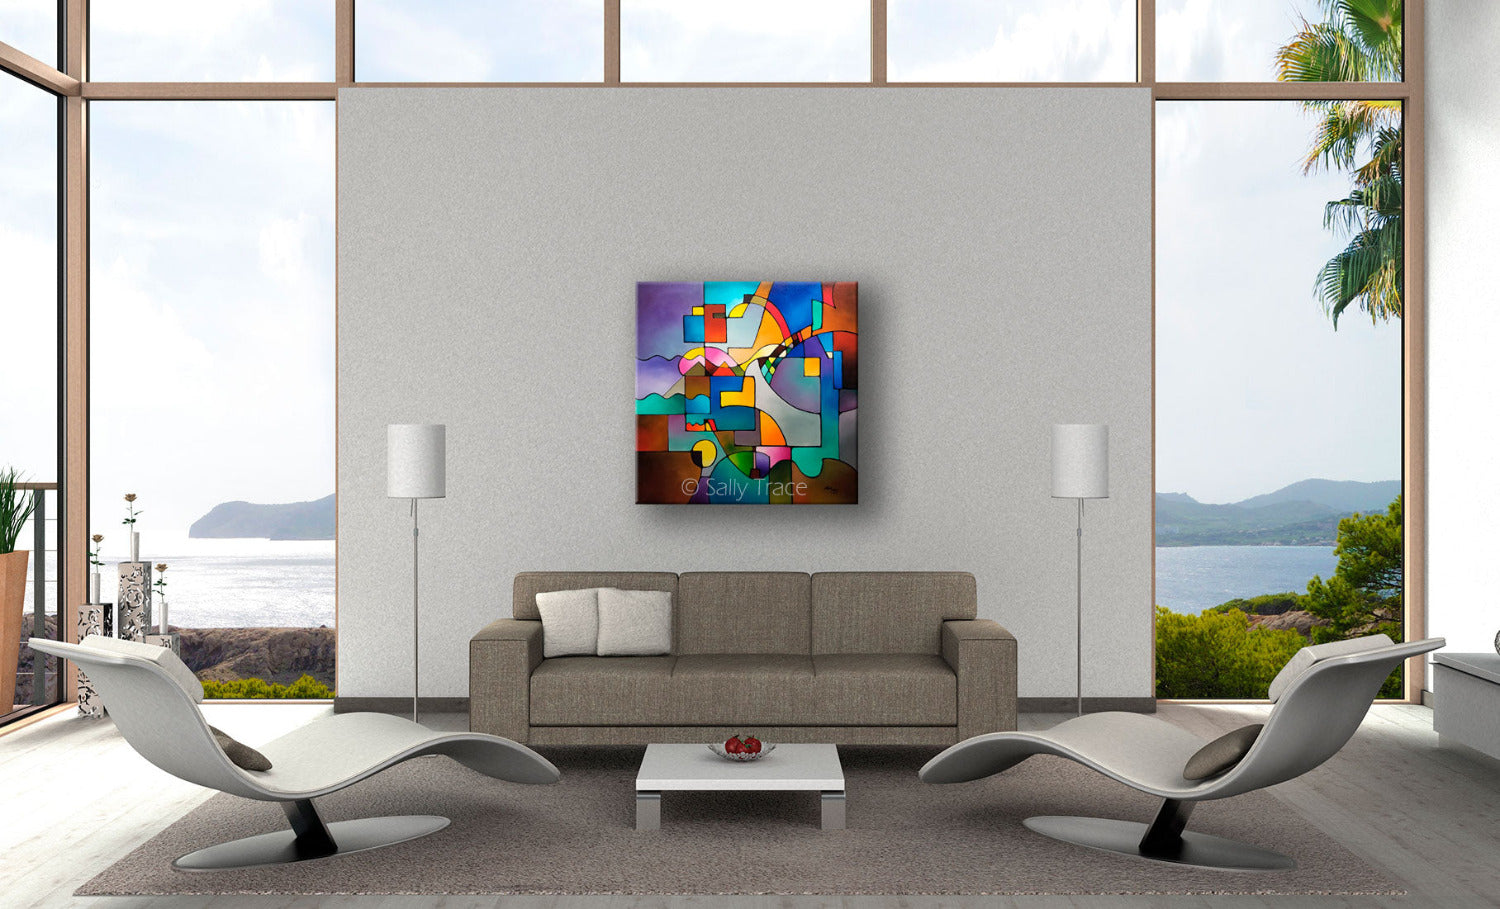 Unified Theory, original abstract art for sale, contemporary modern geometric painting, room view, by Sally Trace